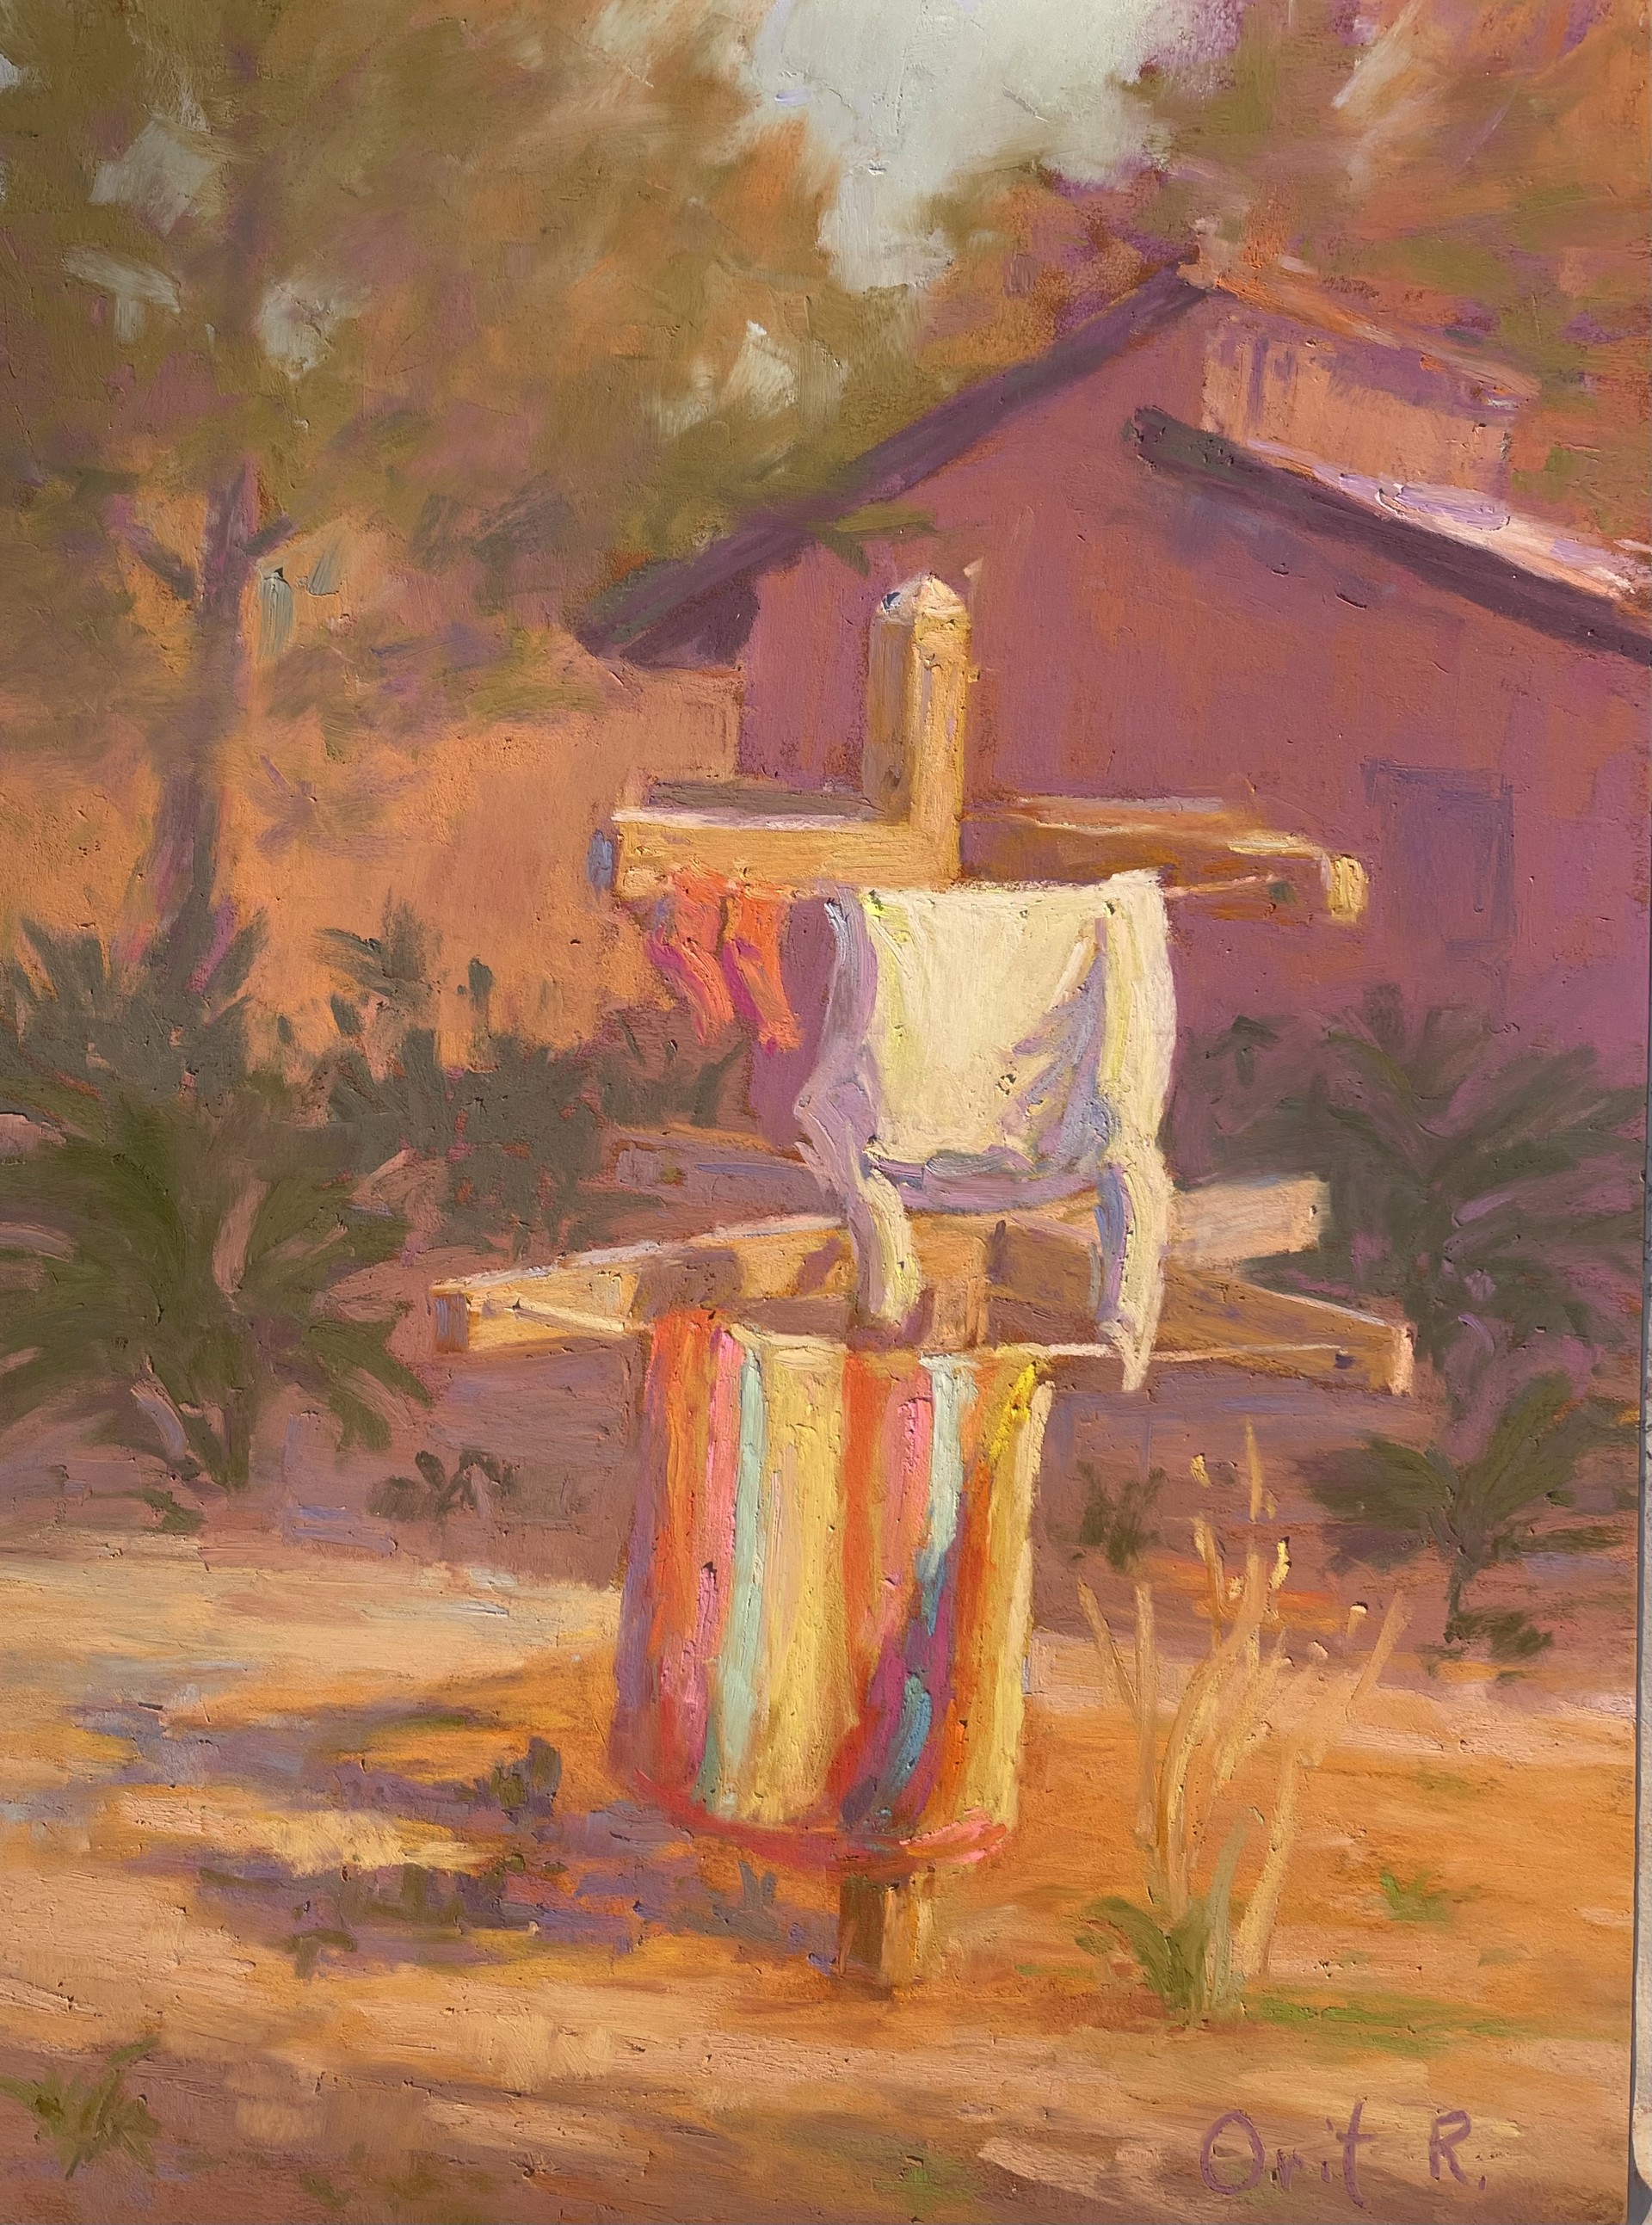 Laundry Day by Orit Reuben